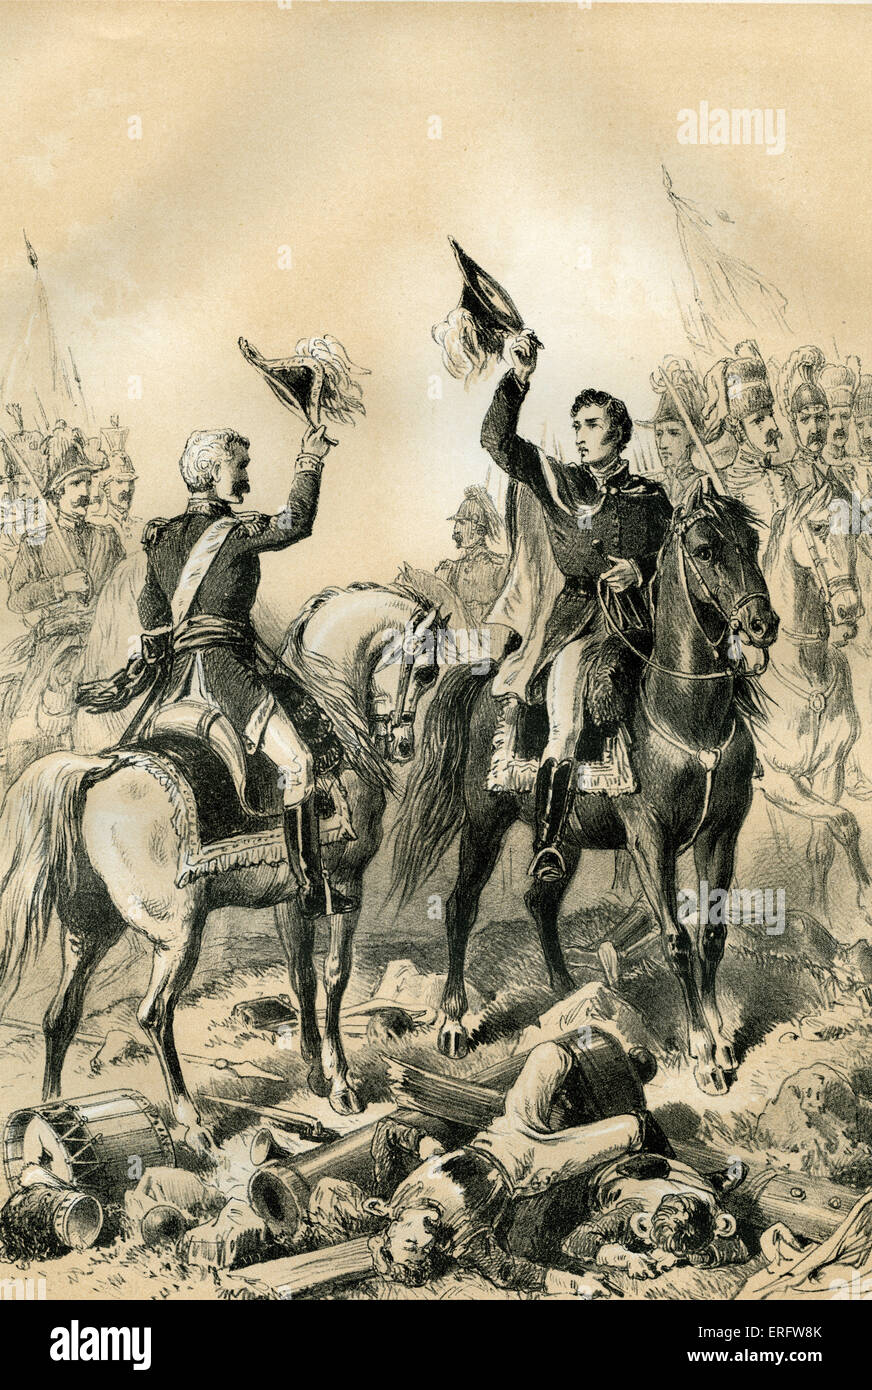 The Meeting of Wellington and Blucher at Waterloo. Wellington led the British army and Blucher led the Prussian army against the French Stock Photo